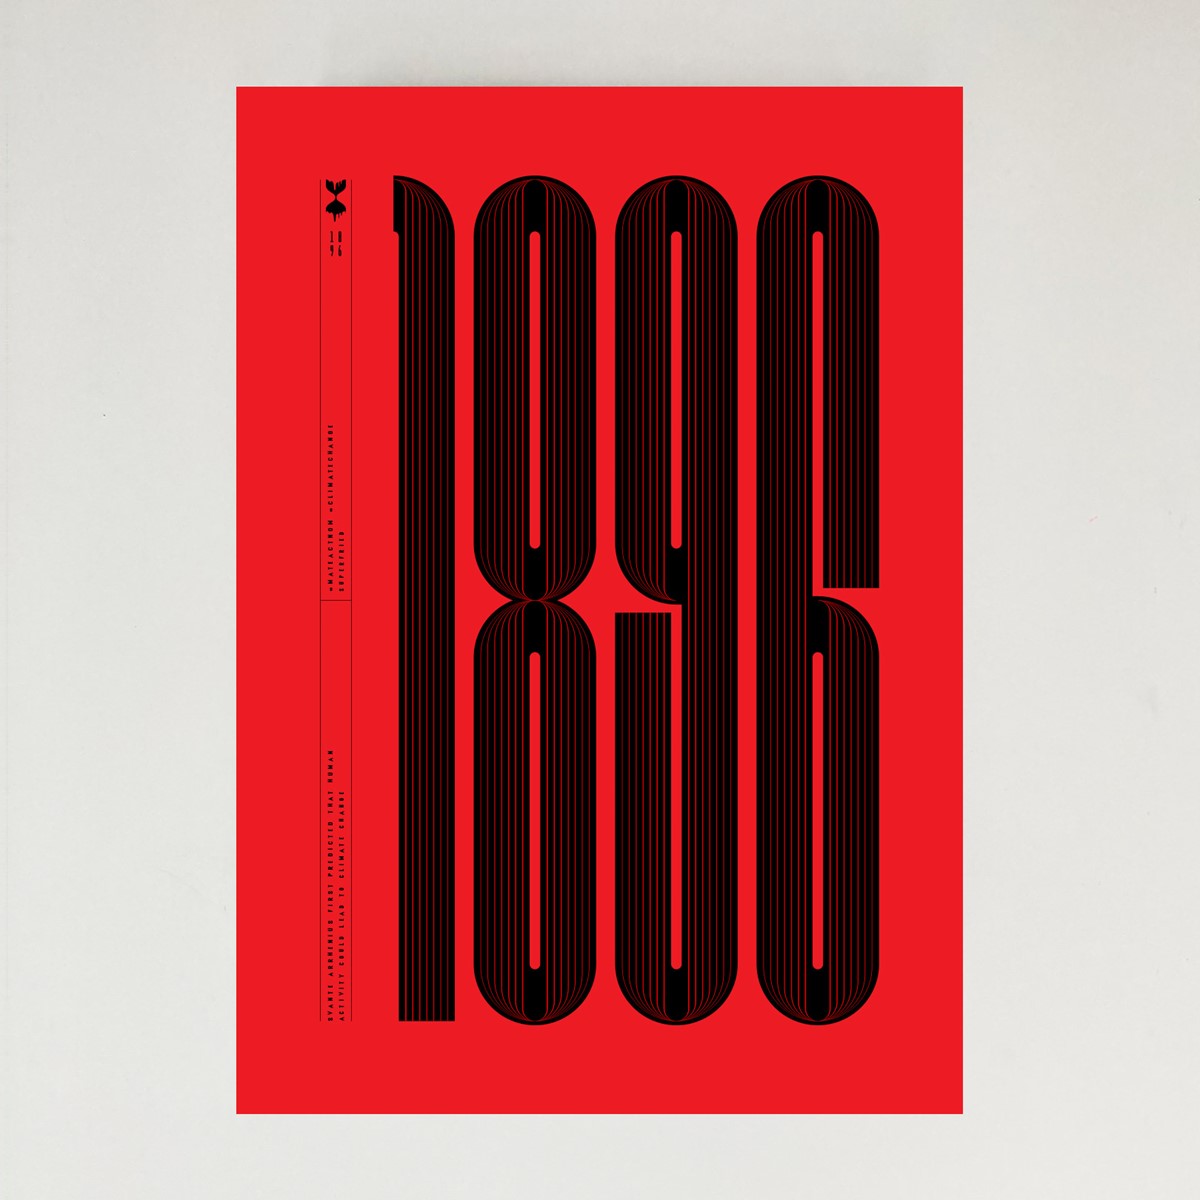 1896. Type experiment poster design. Bespoke typography design by Superfried.